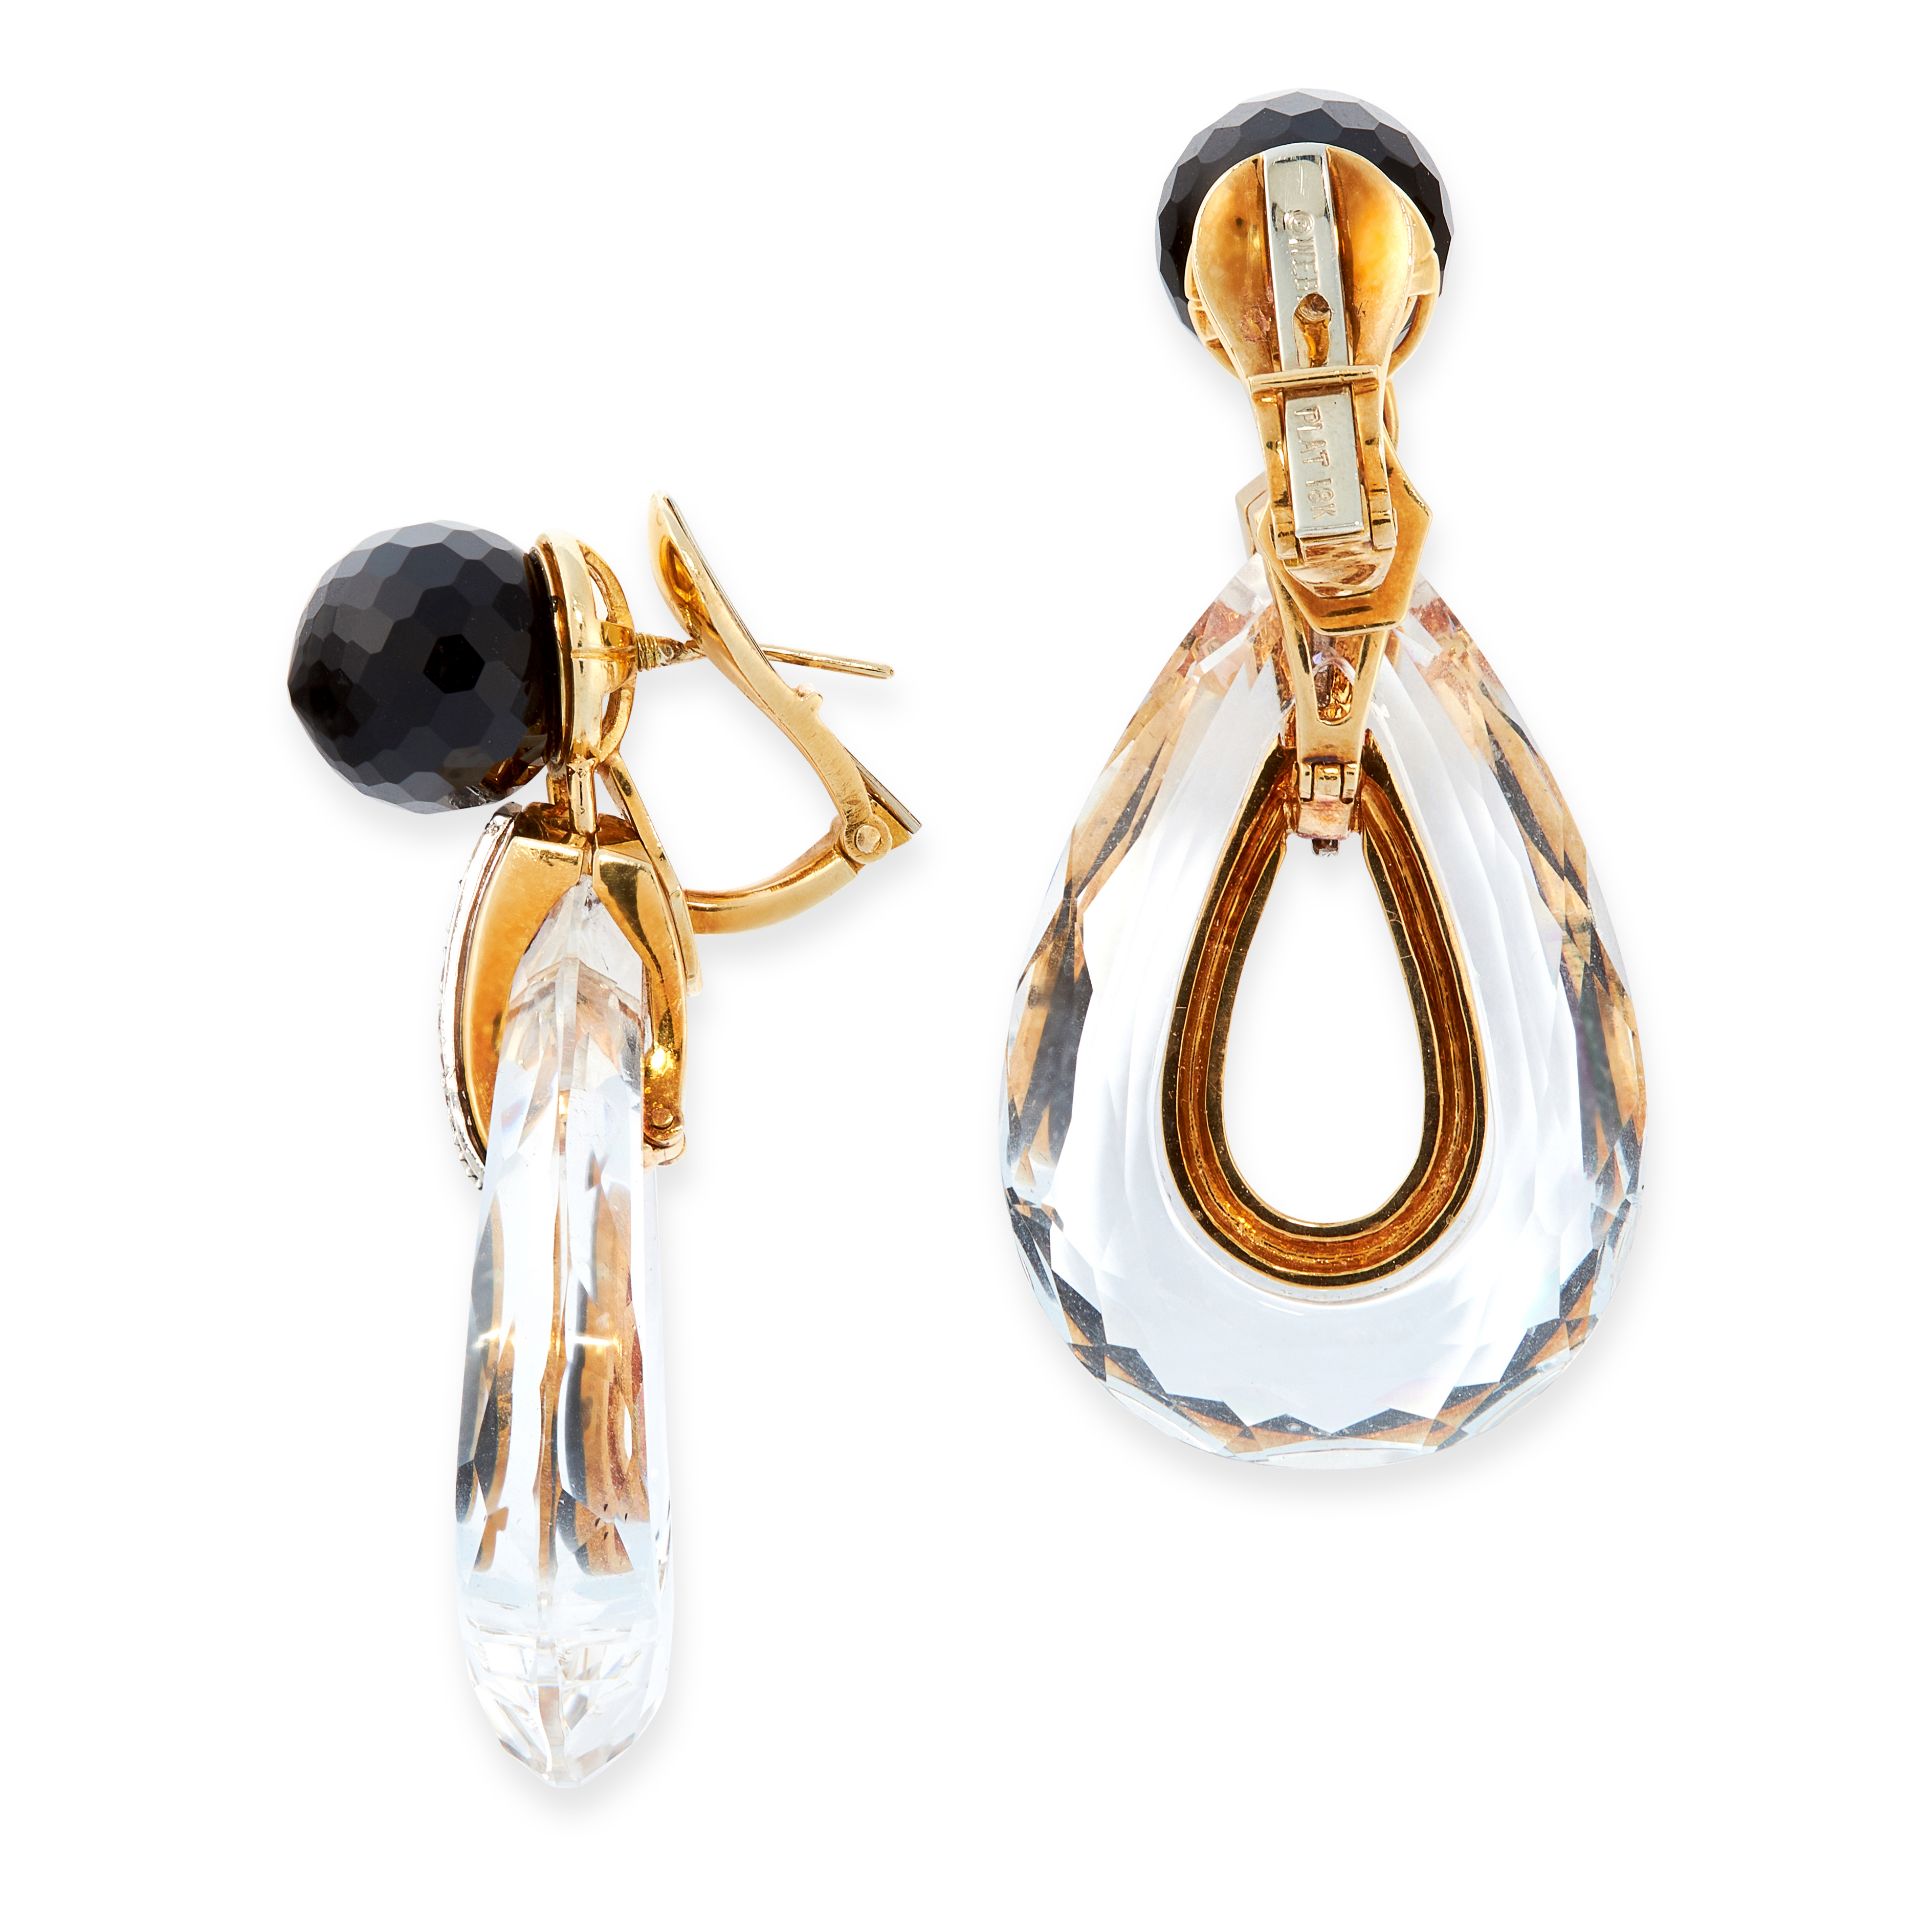 A PAIR OF VINTAGE ROCK CRYSTAL, ONYX, DIAMOND AND ENAMEL EARRINGS, DAVID WEBB in 18ct yellow gold - Image 2 of 2